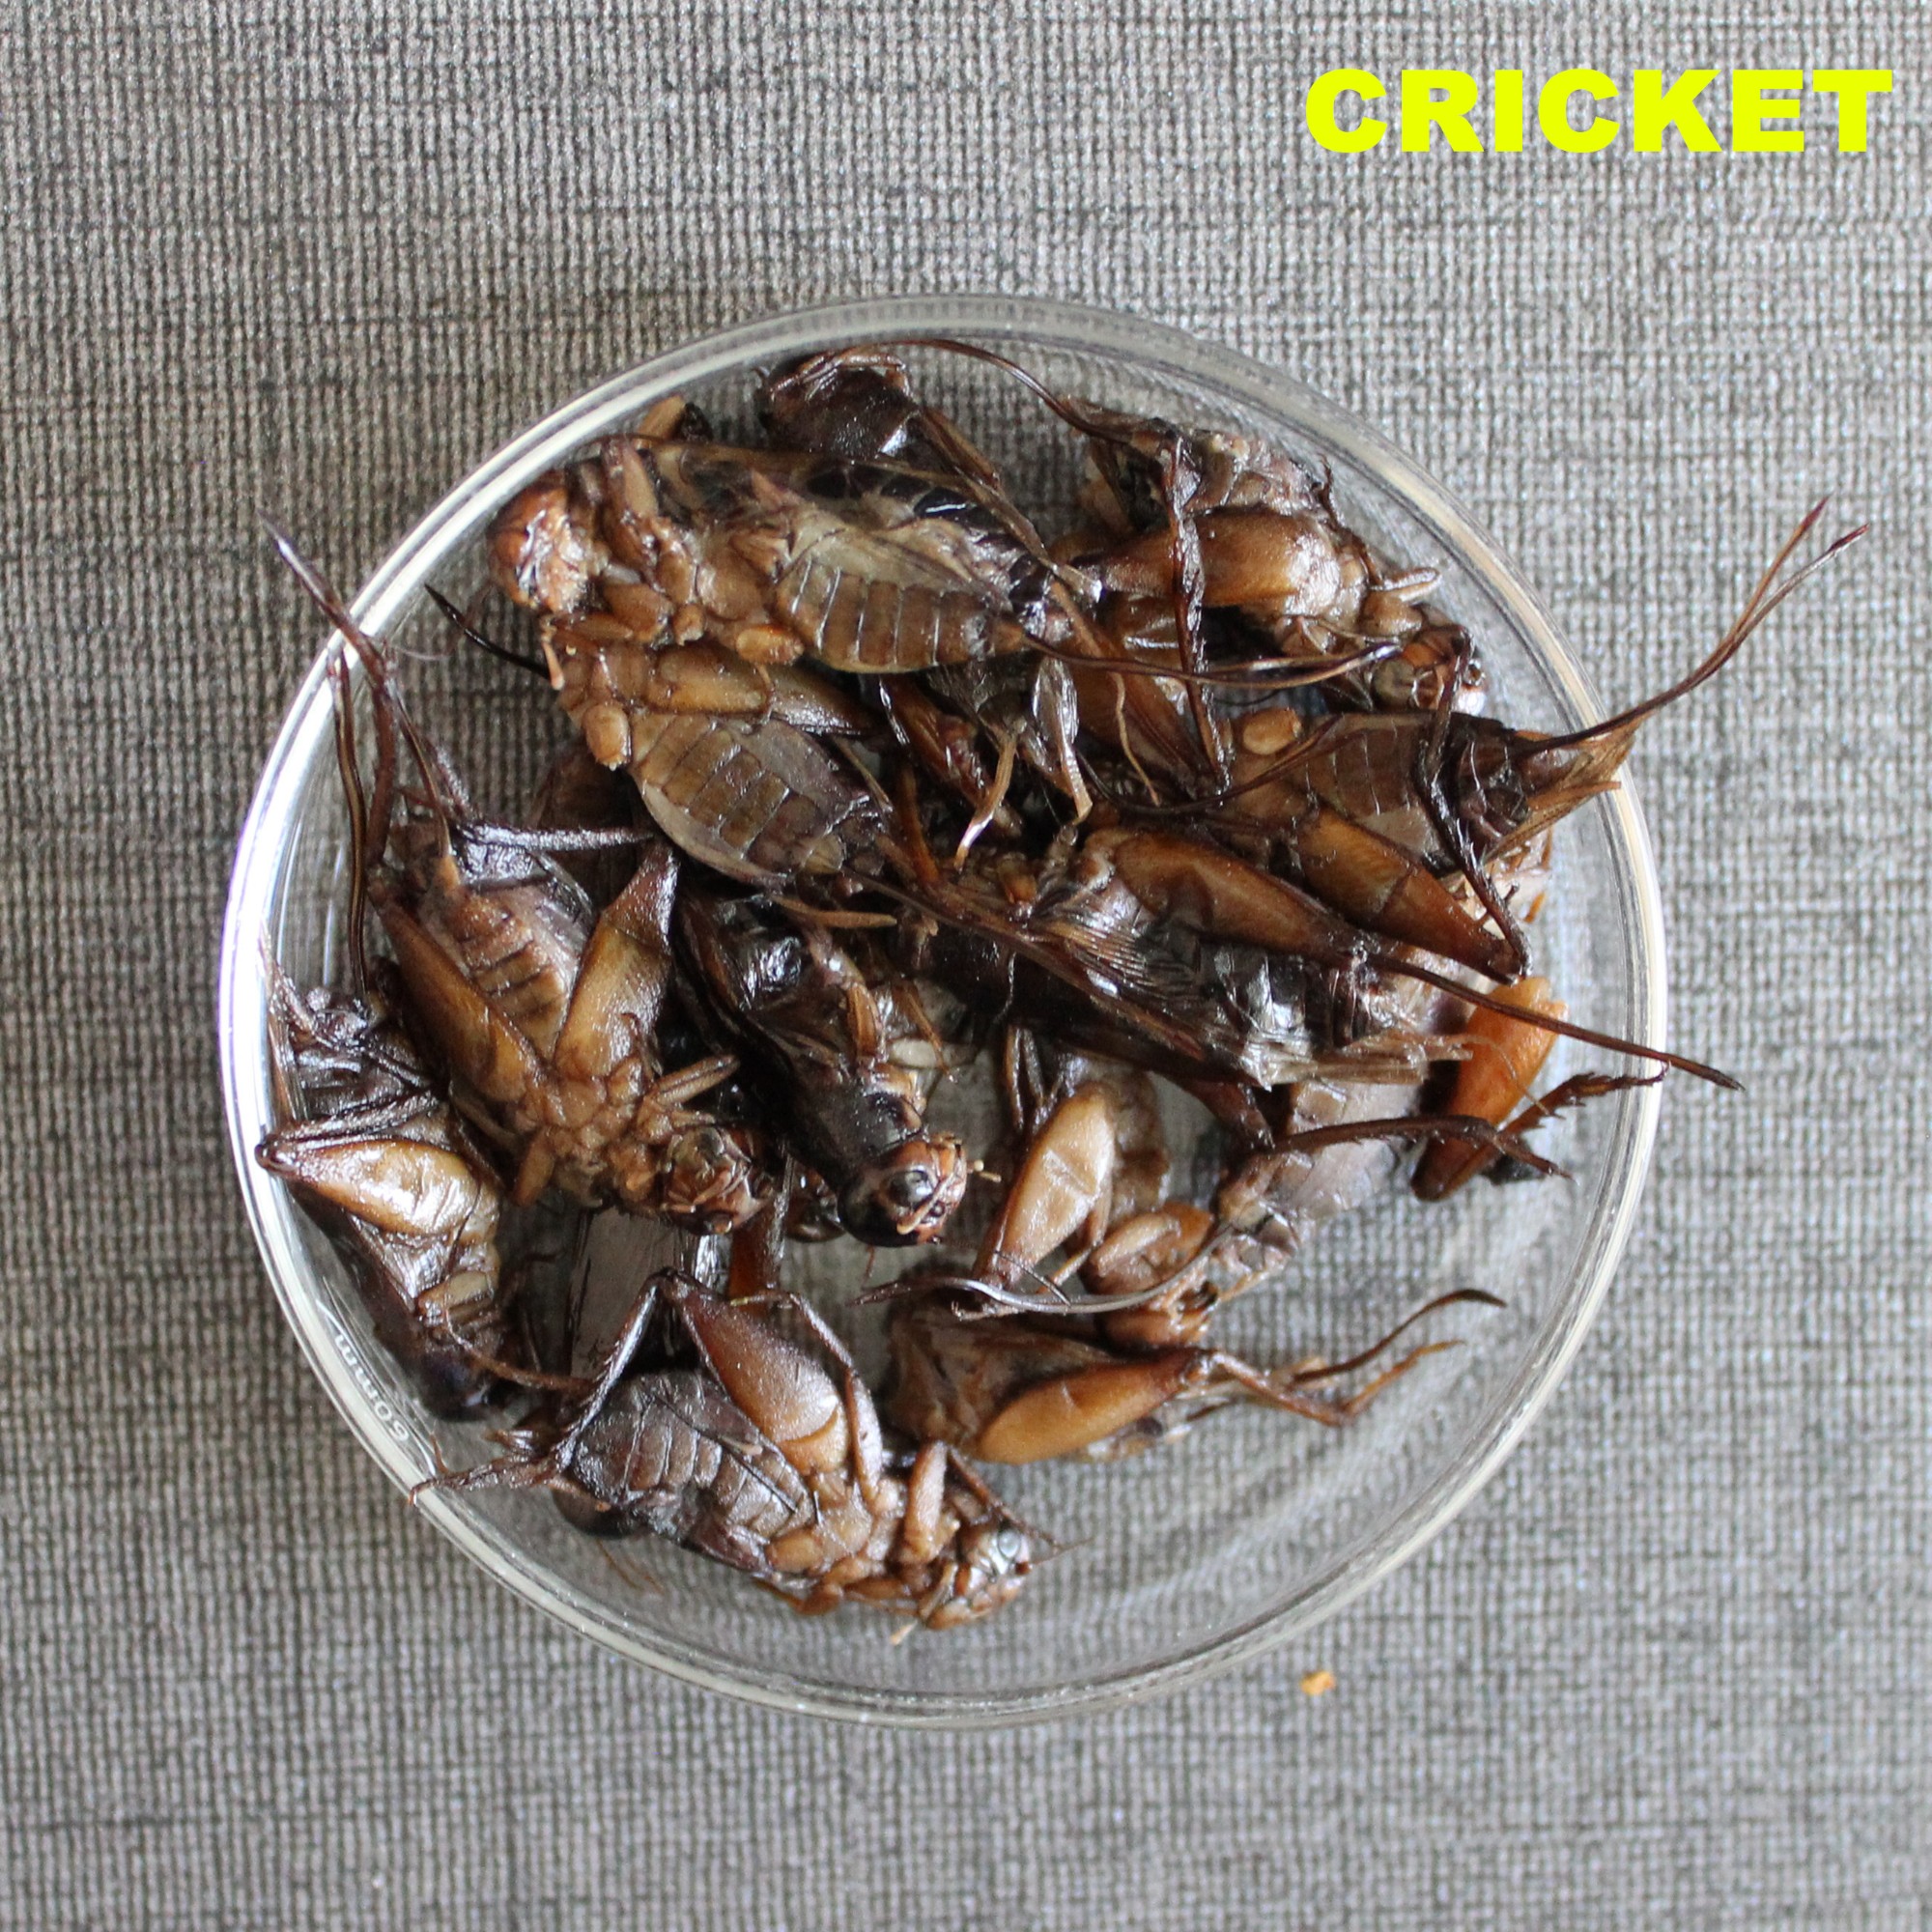 Fresh Preserved Insects and Invertebrates Reptile Fish Food Retort Pouch 